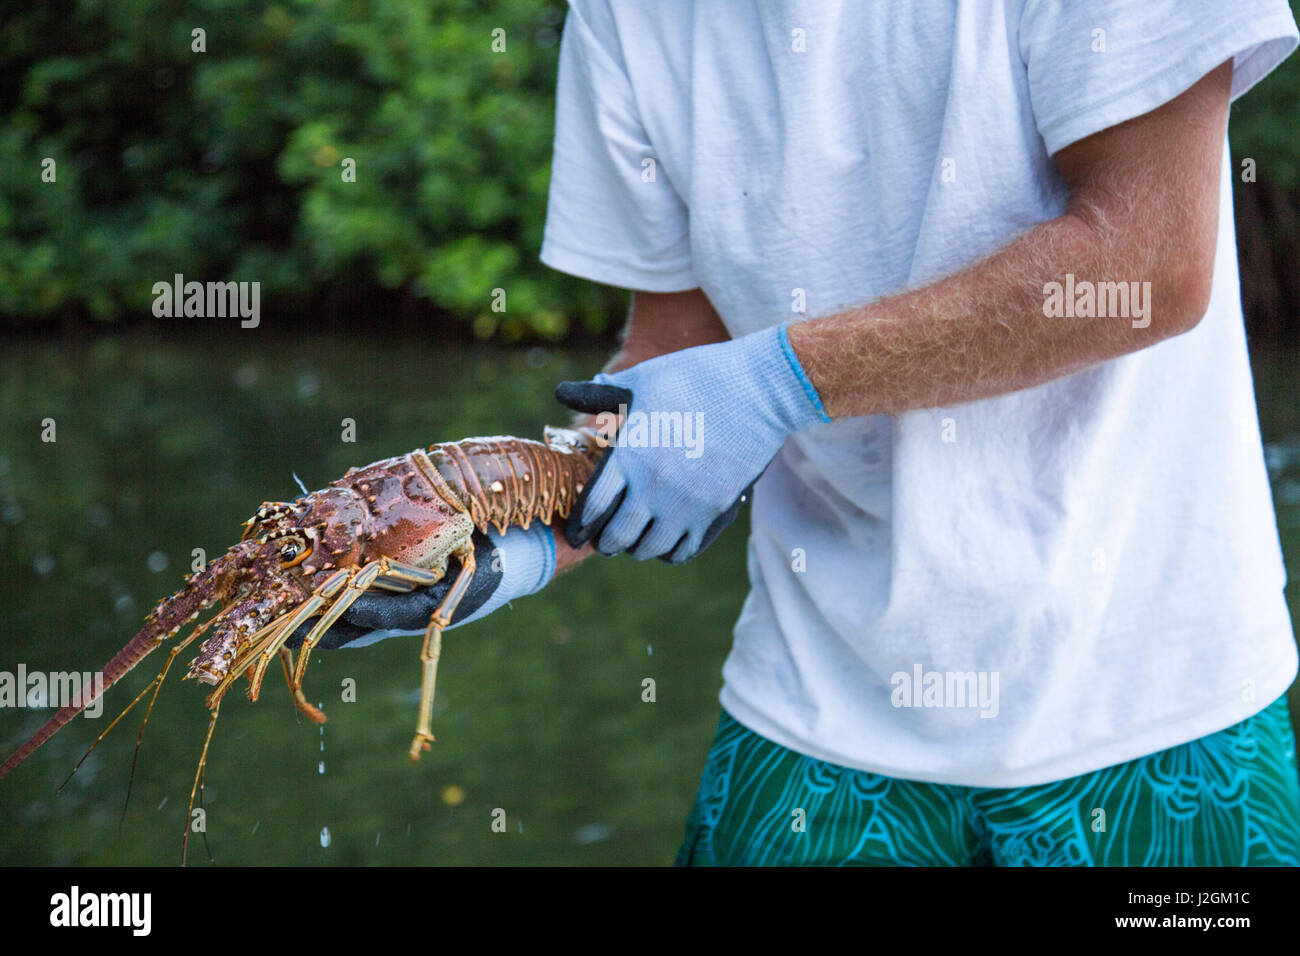 A man unloads freshly caught spiny lobster during the regular season for  harvesting Florida lobster in the lower Florida Keys Stock Photo - Alamy